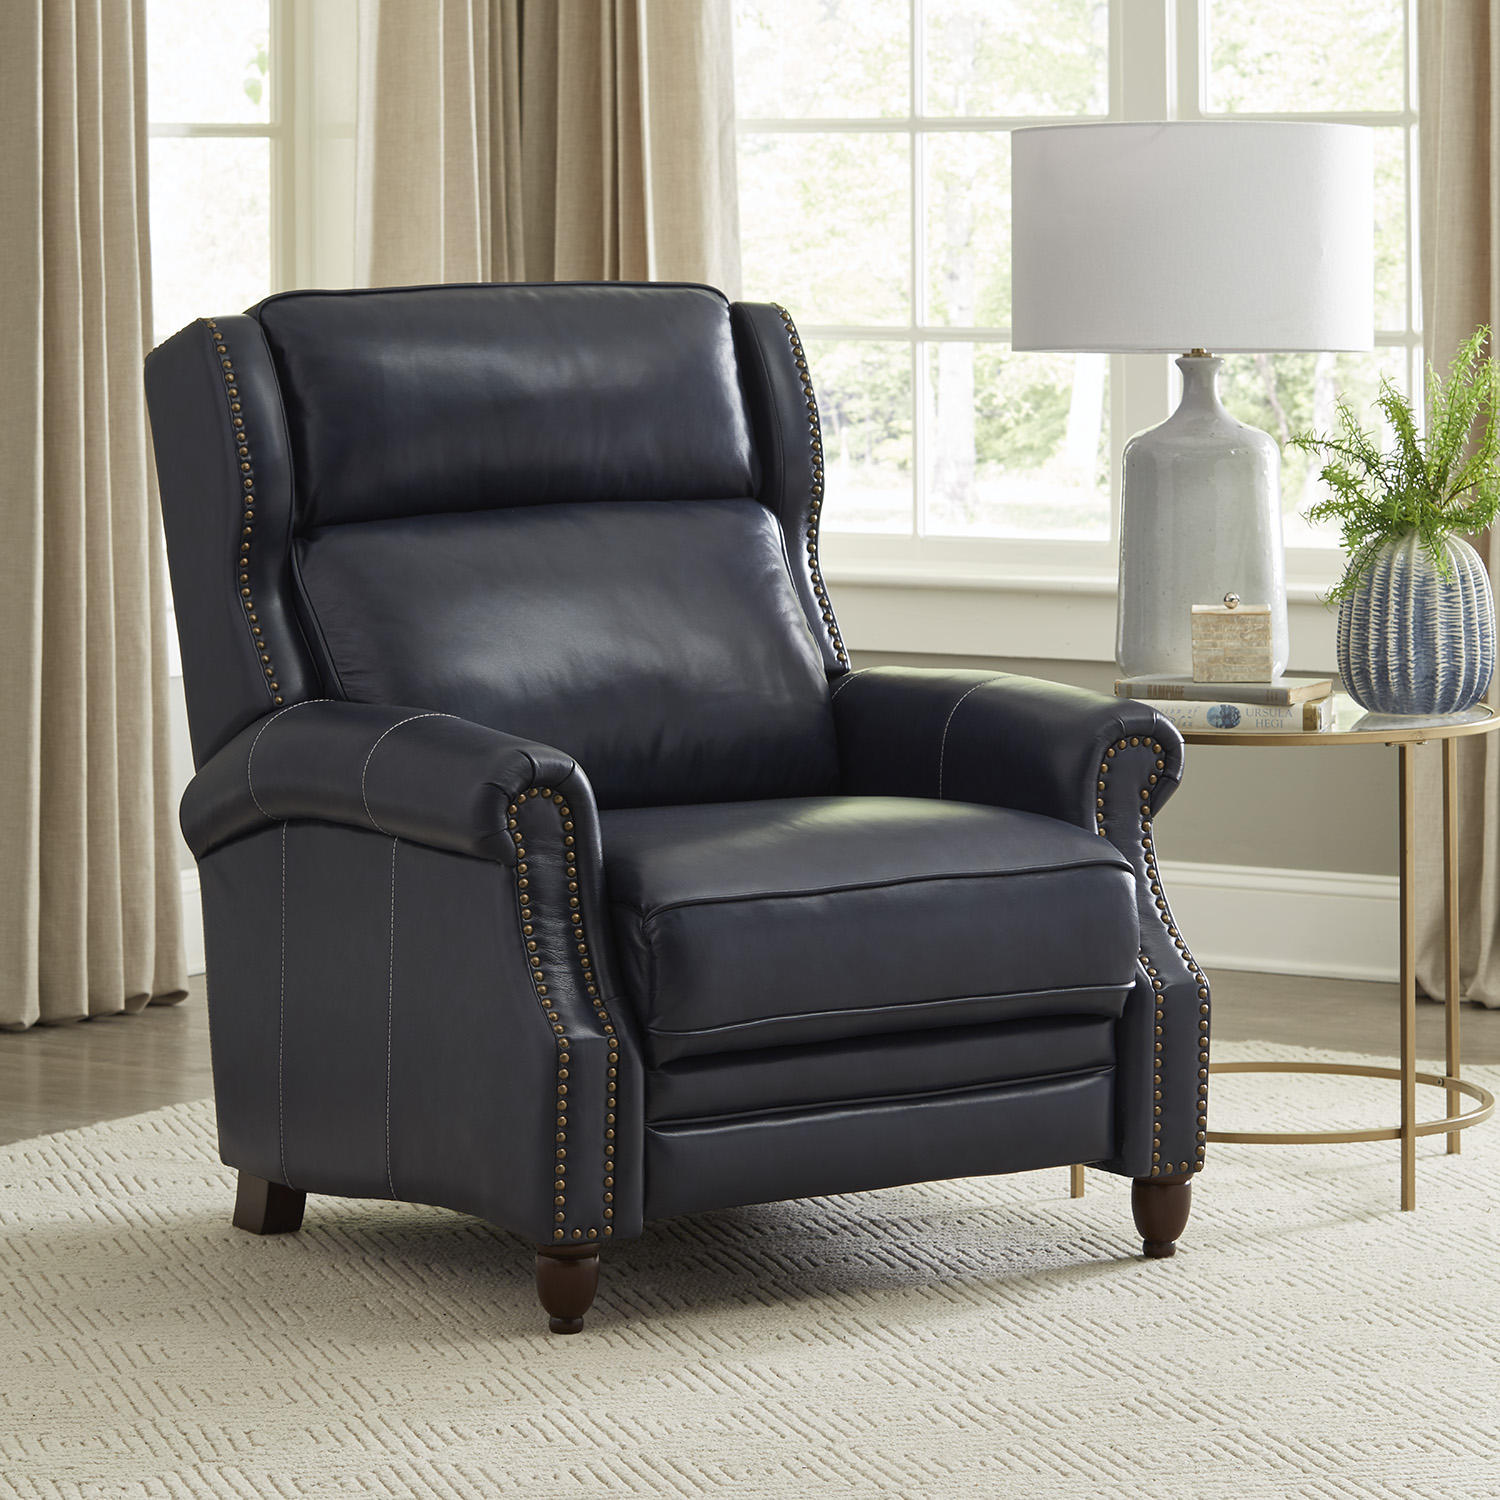 Member’s Mark Macey Leather Recliner